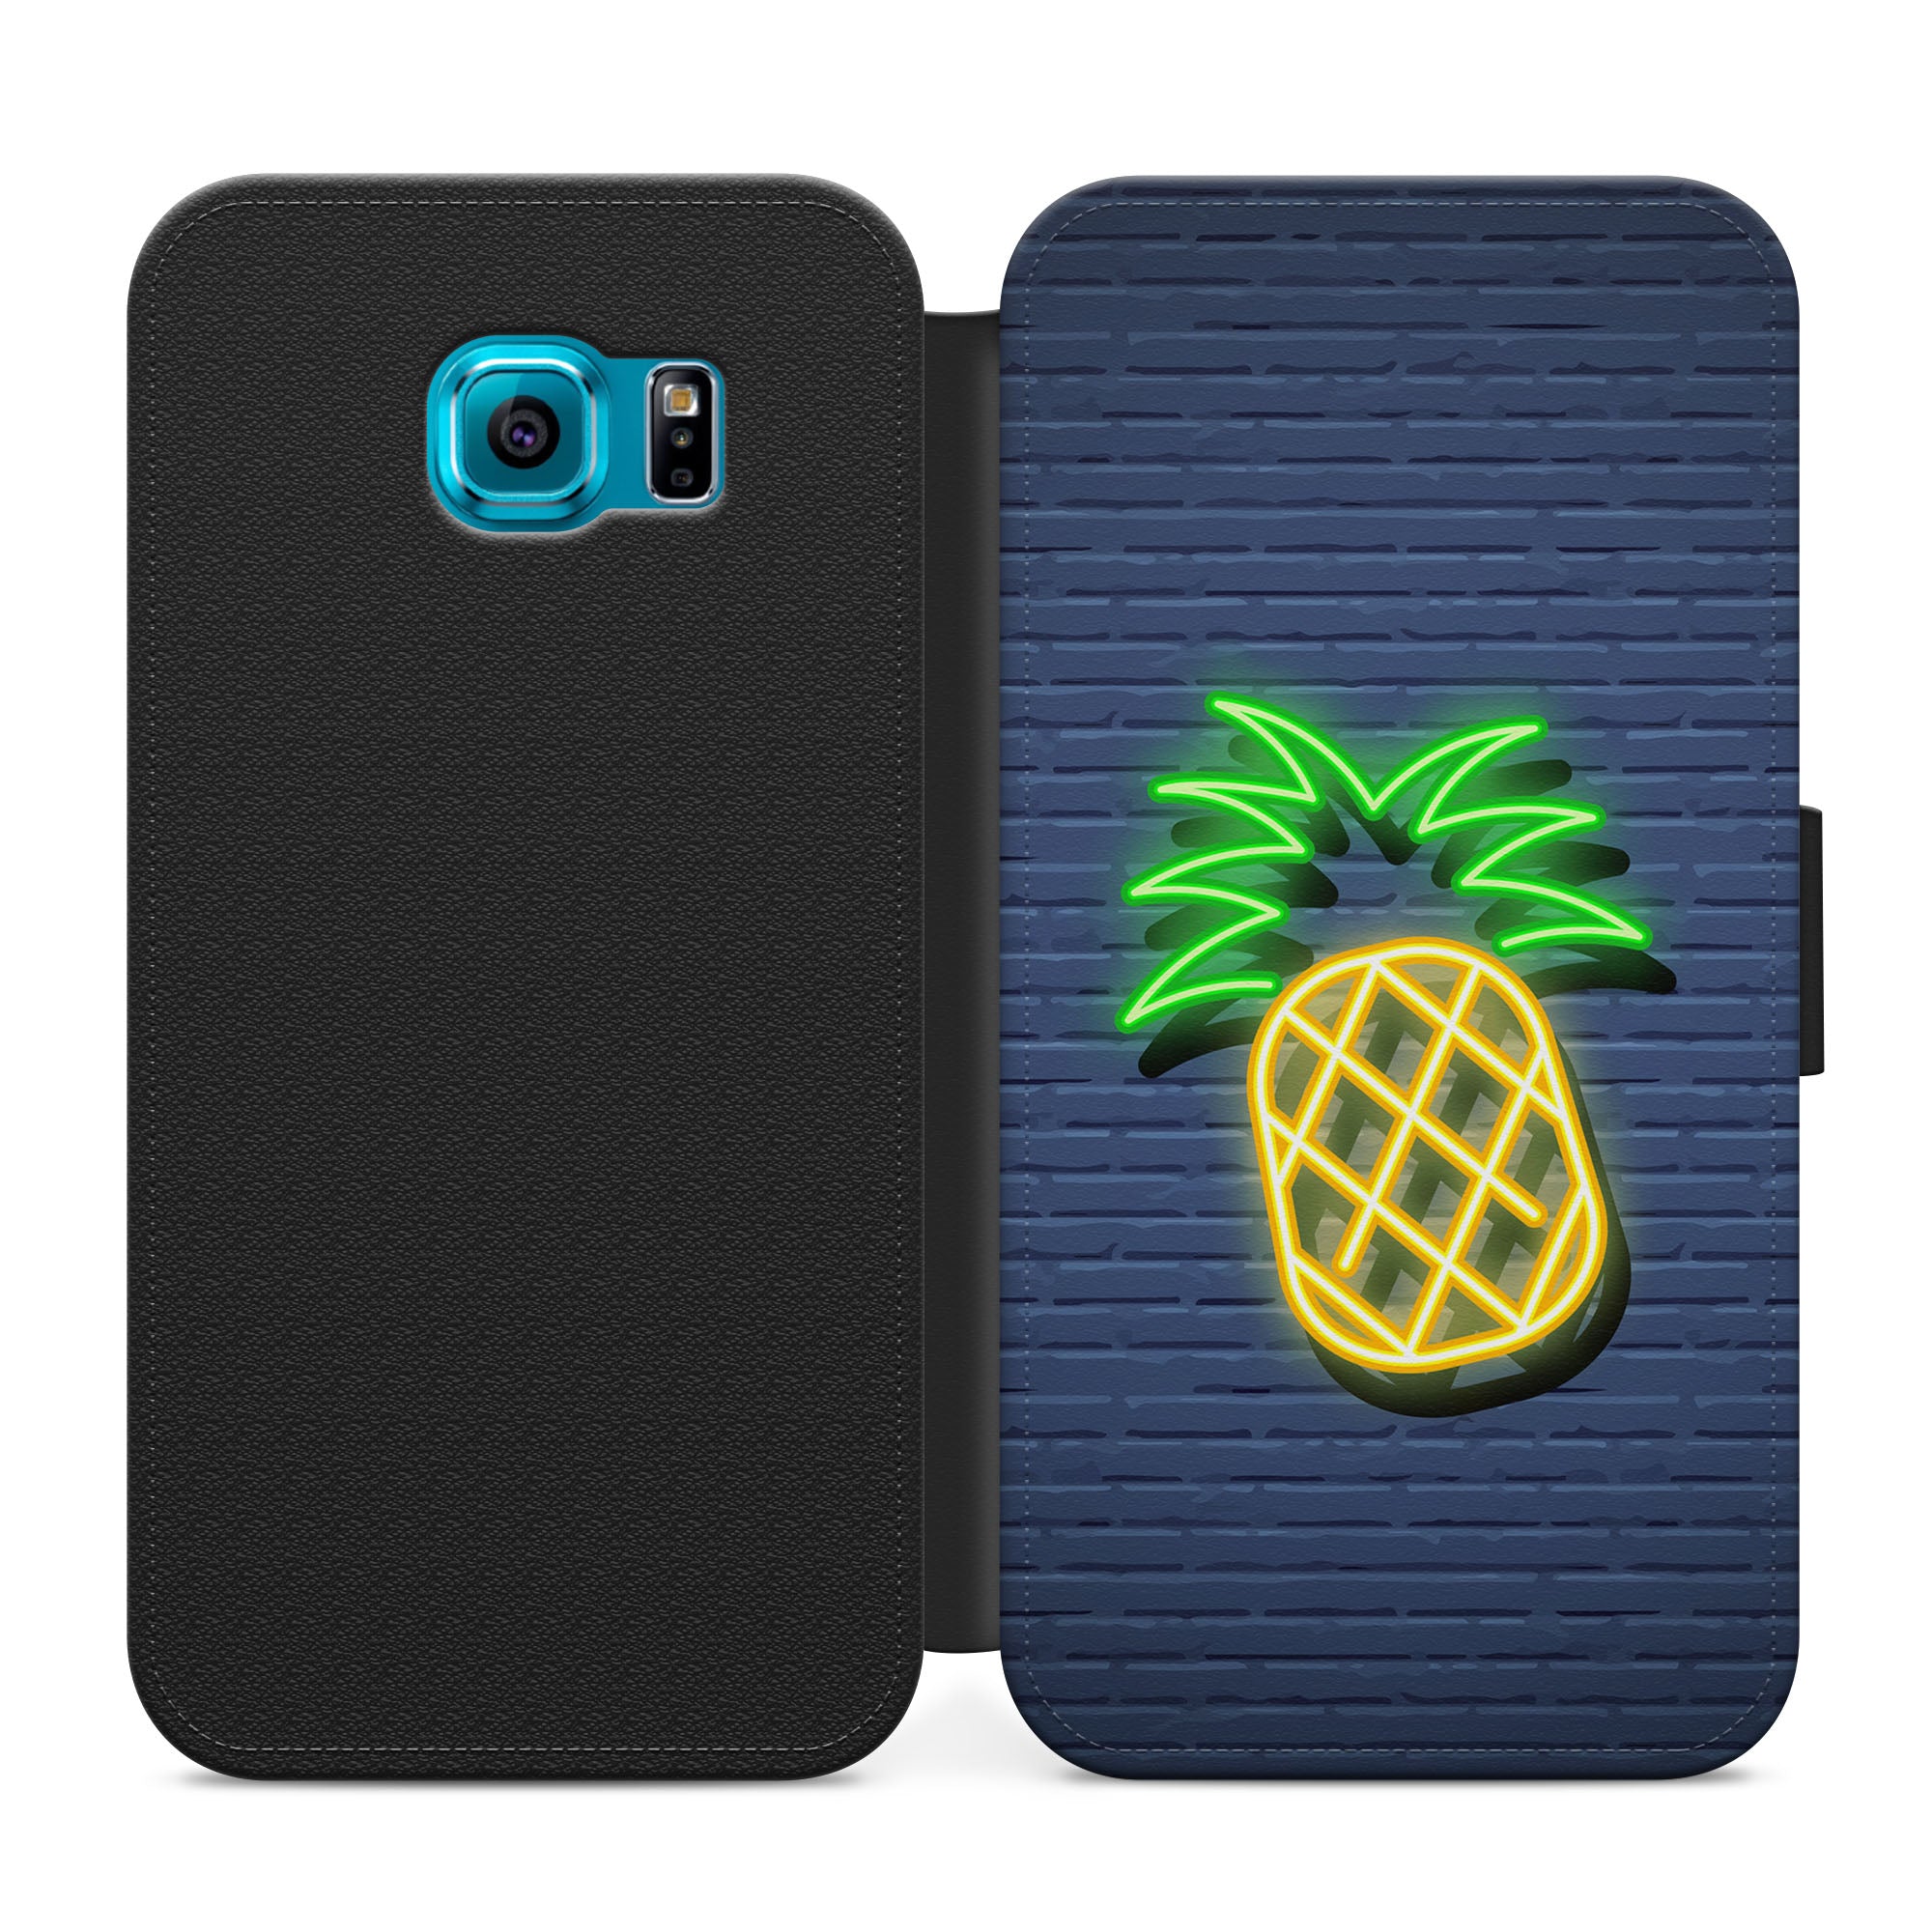 Neon Pineapple Faux Leather Flip Case Wallet for iPhone / Samsung